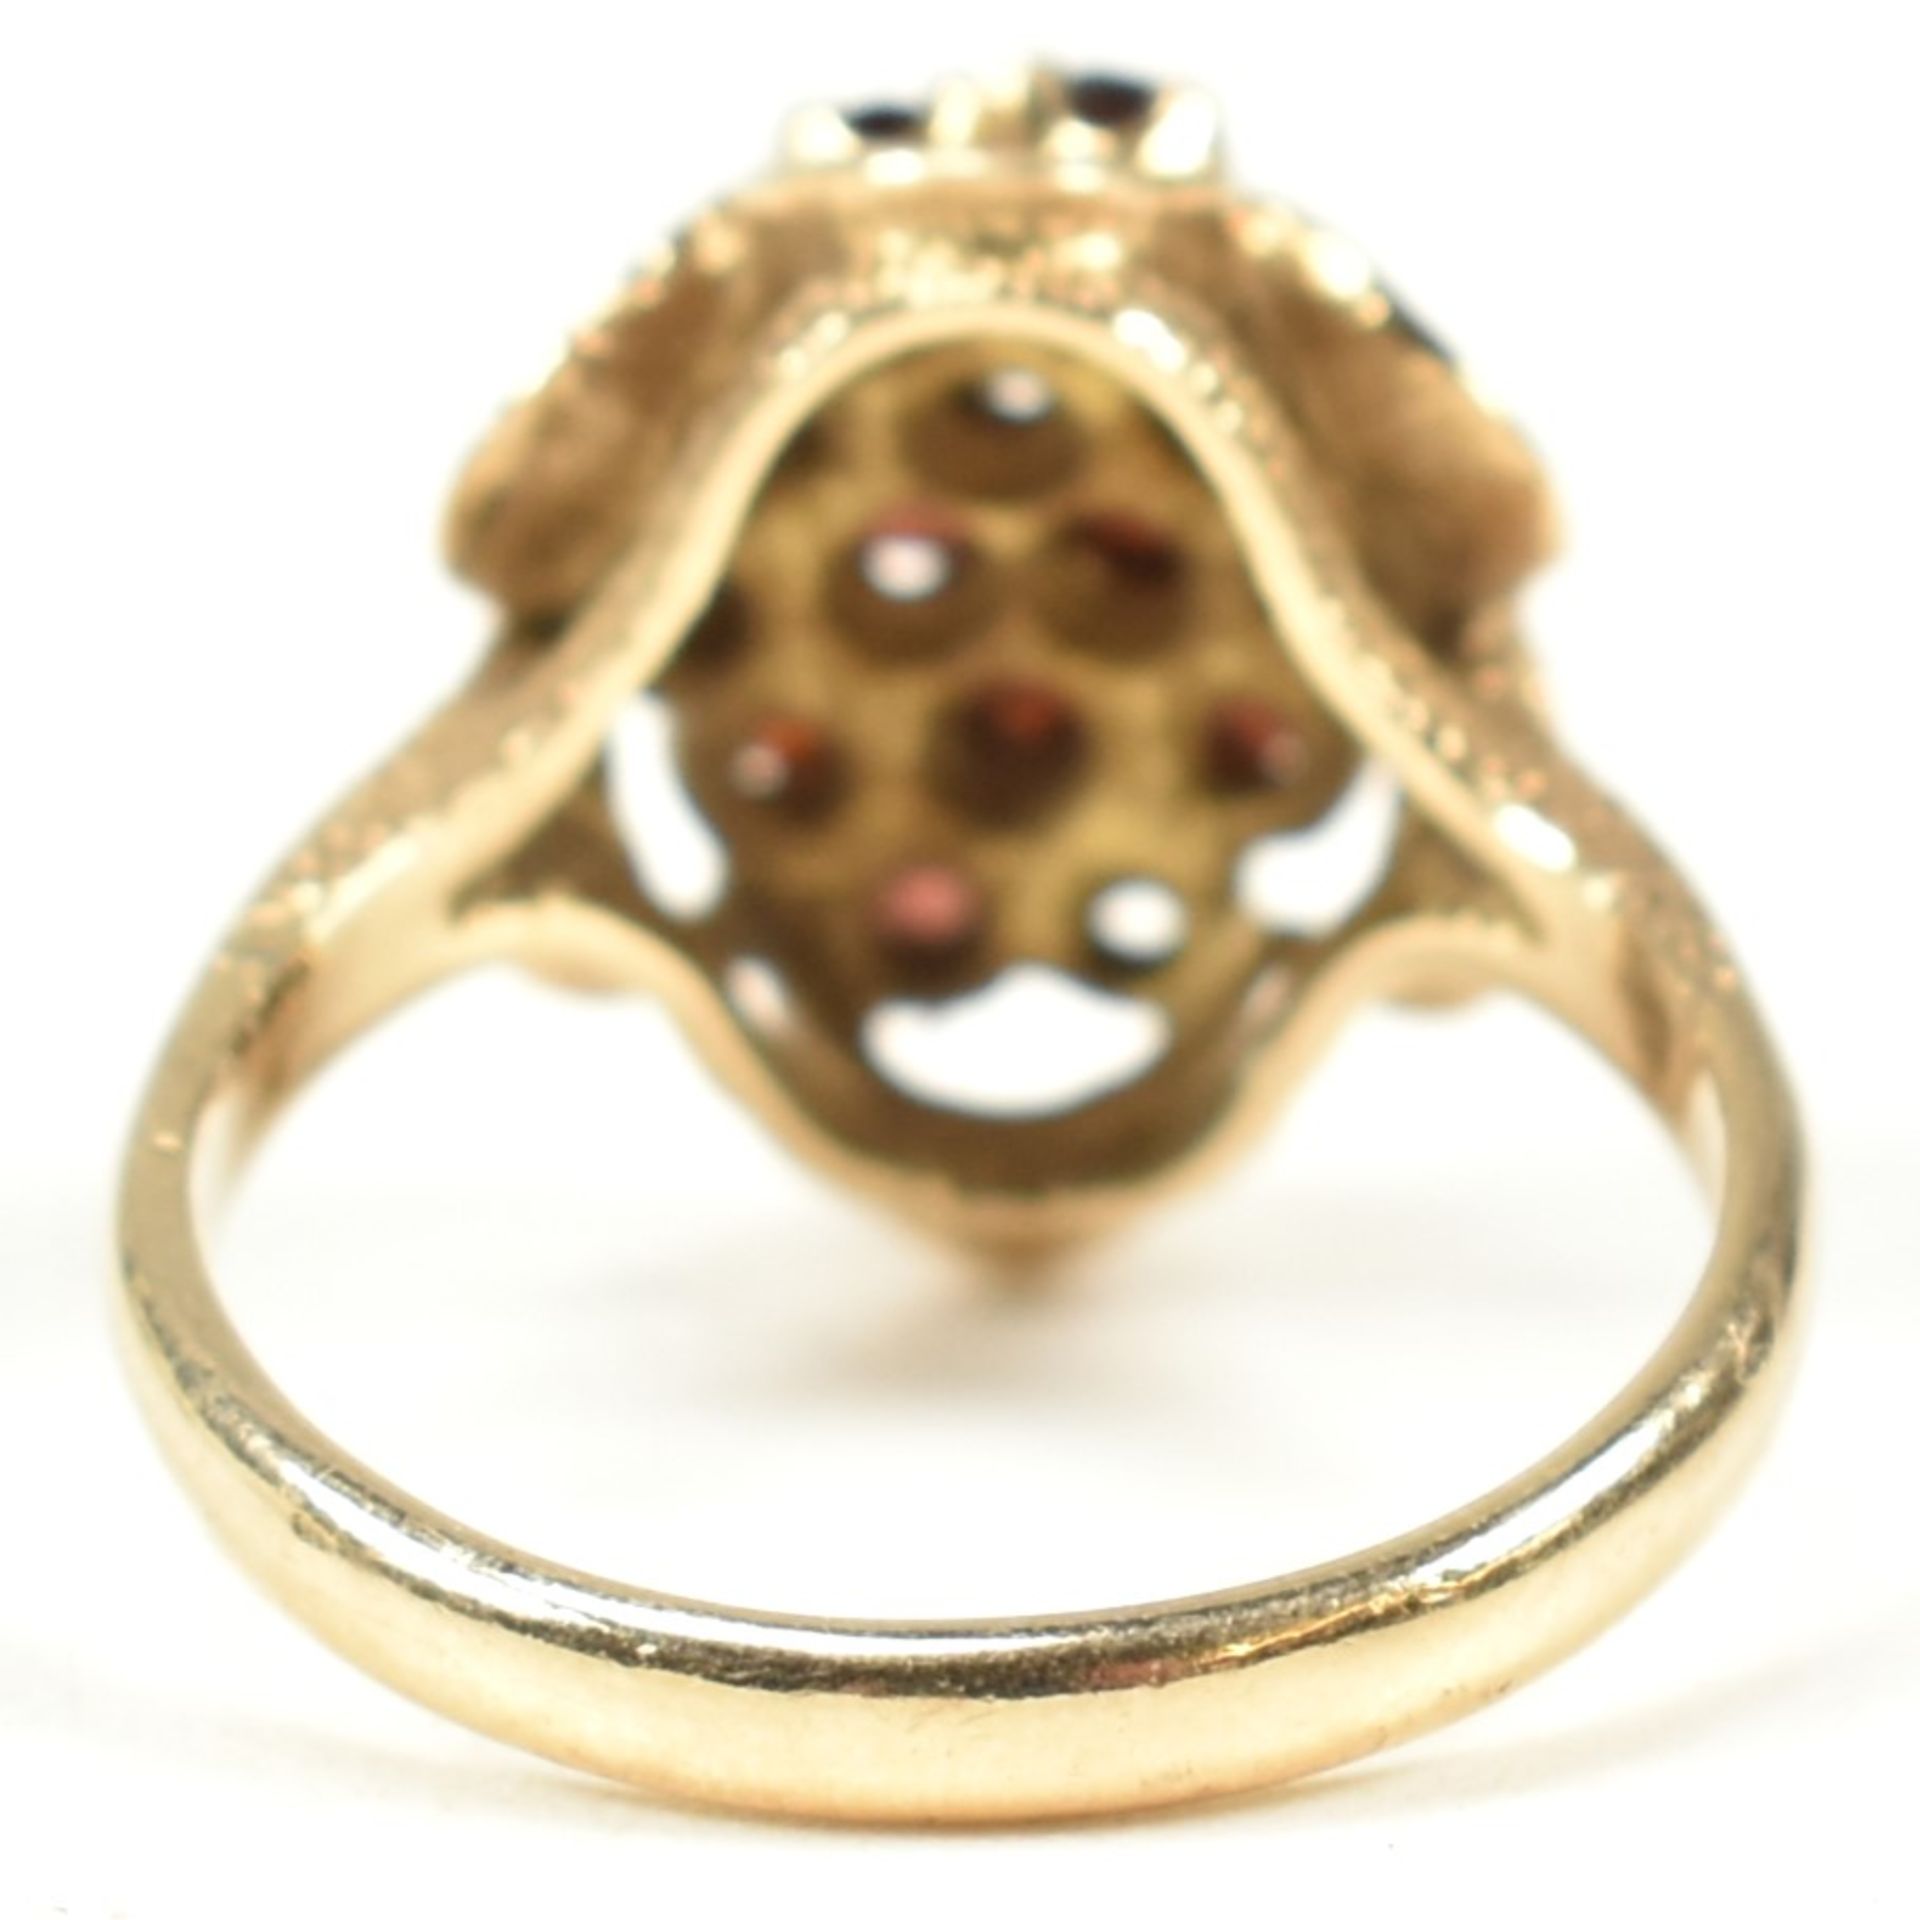 HALLMARKED 9CT GOLD CLUSTER RING - Image 2 of 10